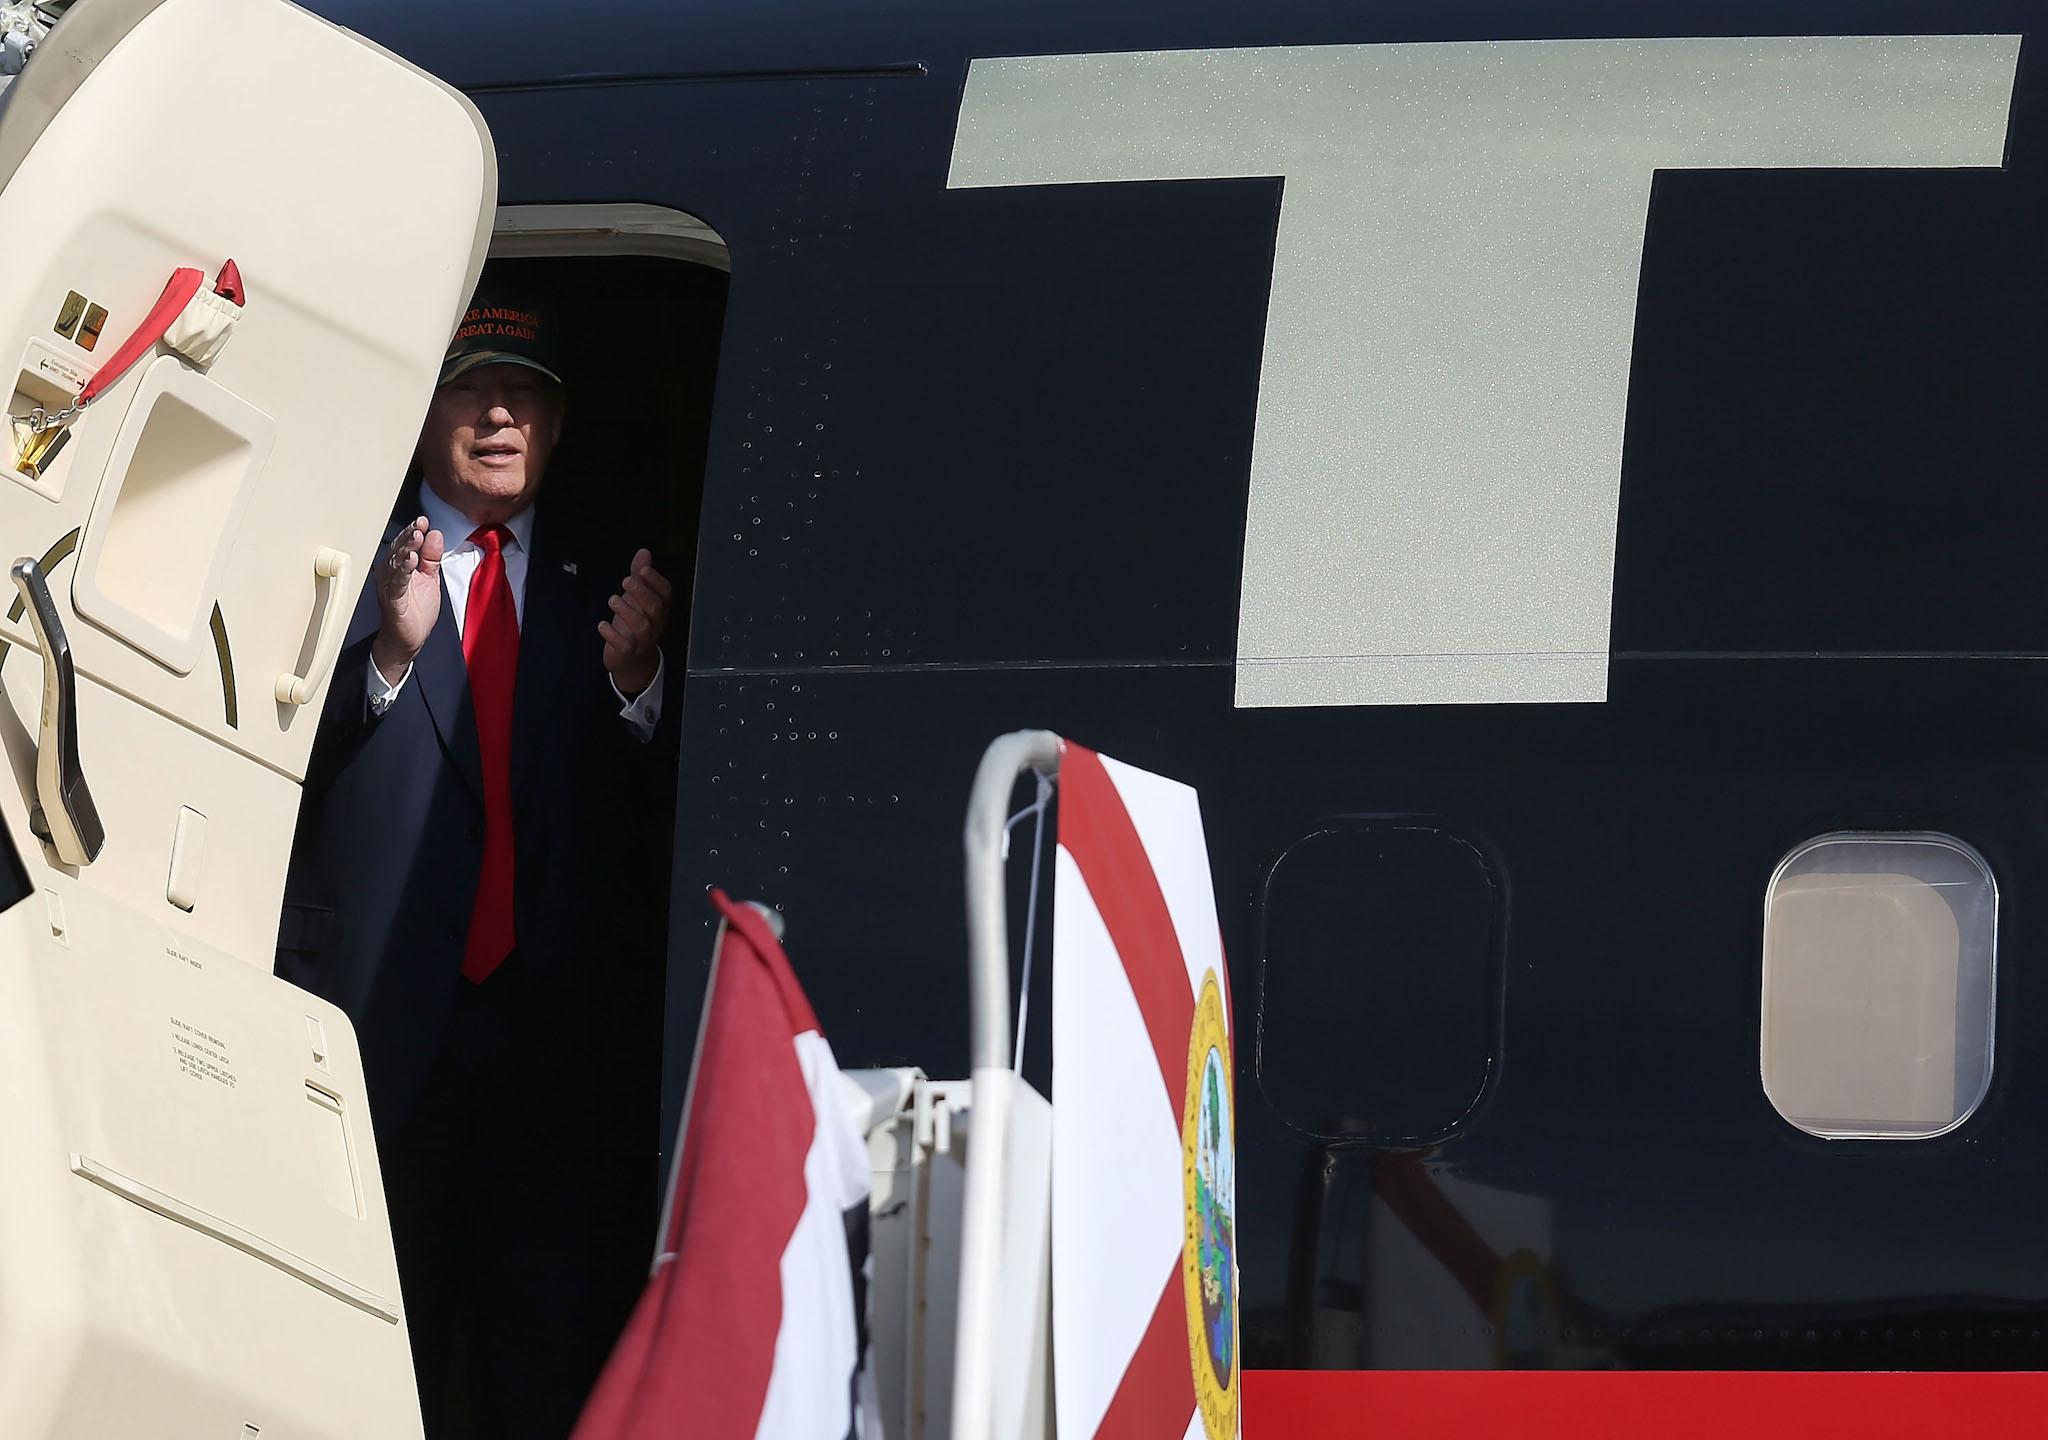 Republican presidential candidate Donald Trump waits to exit his campaign plane for a campaign rally at the Million Air Orlando, which is at Orlando Sanford International Airport on October 25, 2016 in Sanford, Florida